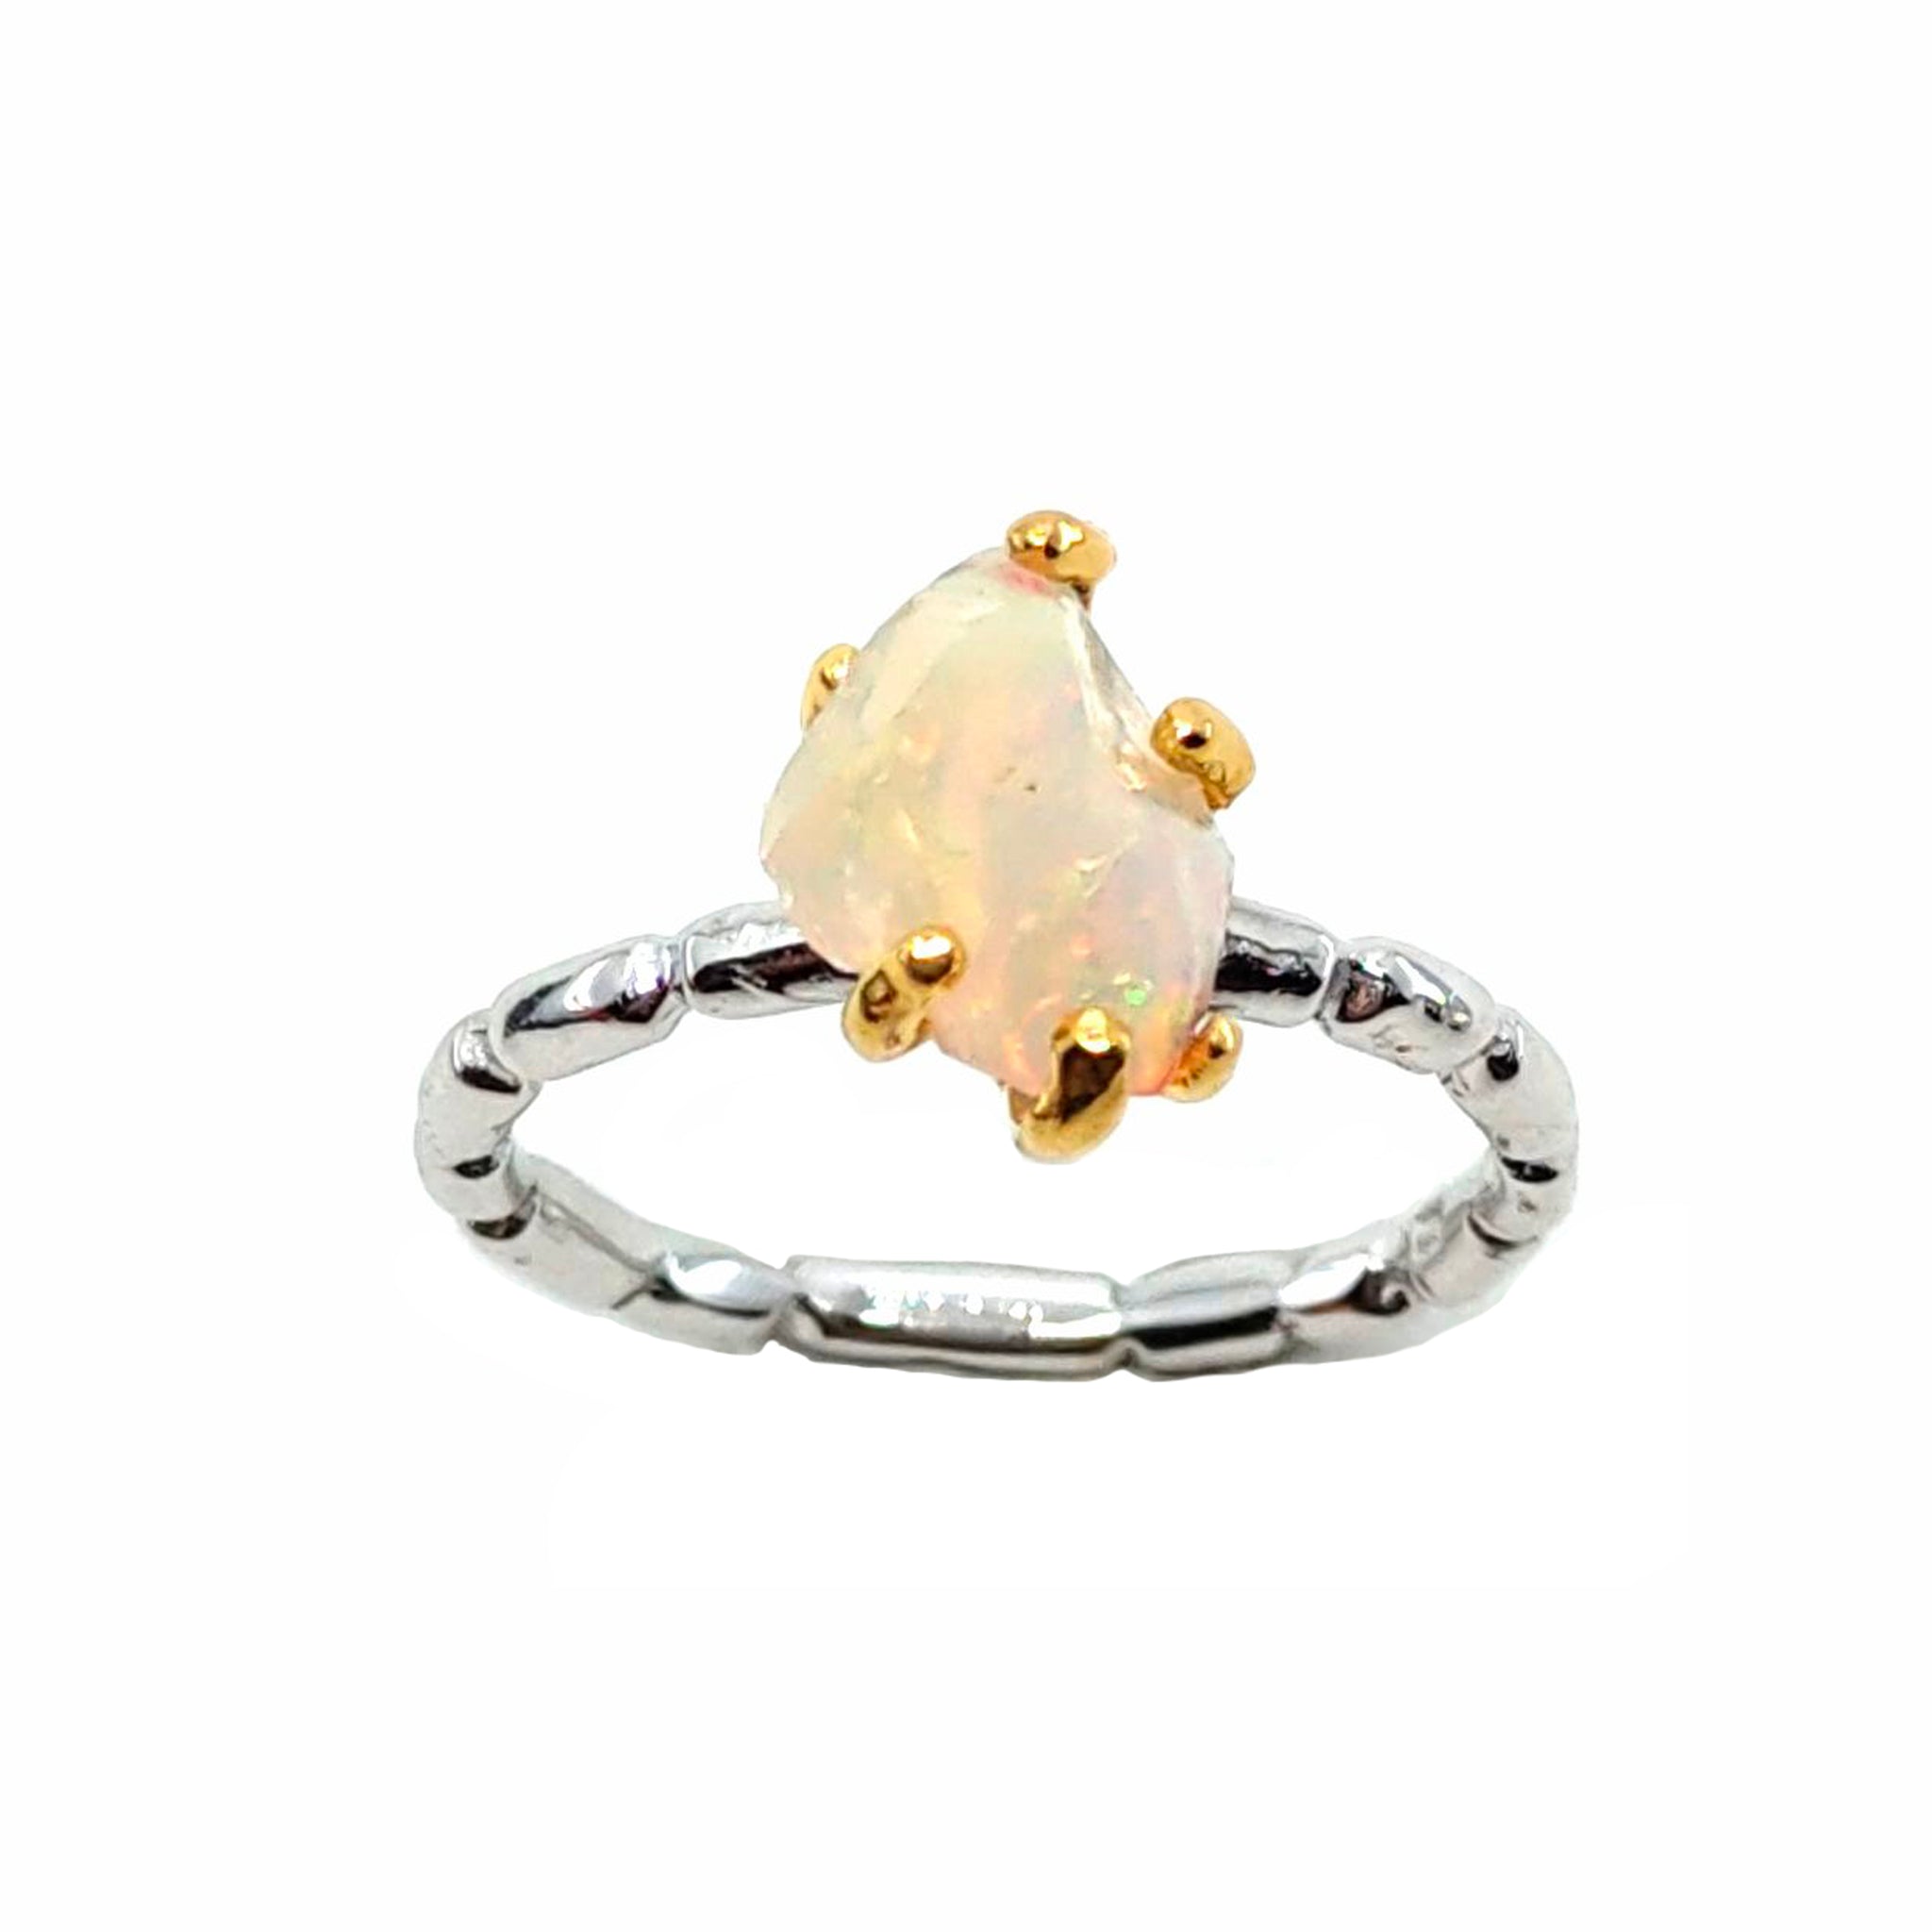 Rough Stone - 925 Sterling Silver Ring, Rough Faceted Ethiopian Opal, Plated with 3 Micron 22K Yellow Gold and White Rhodium